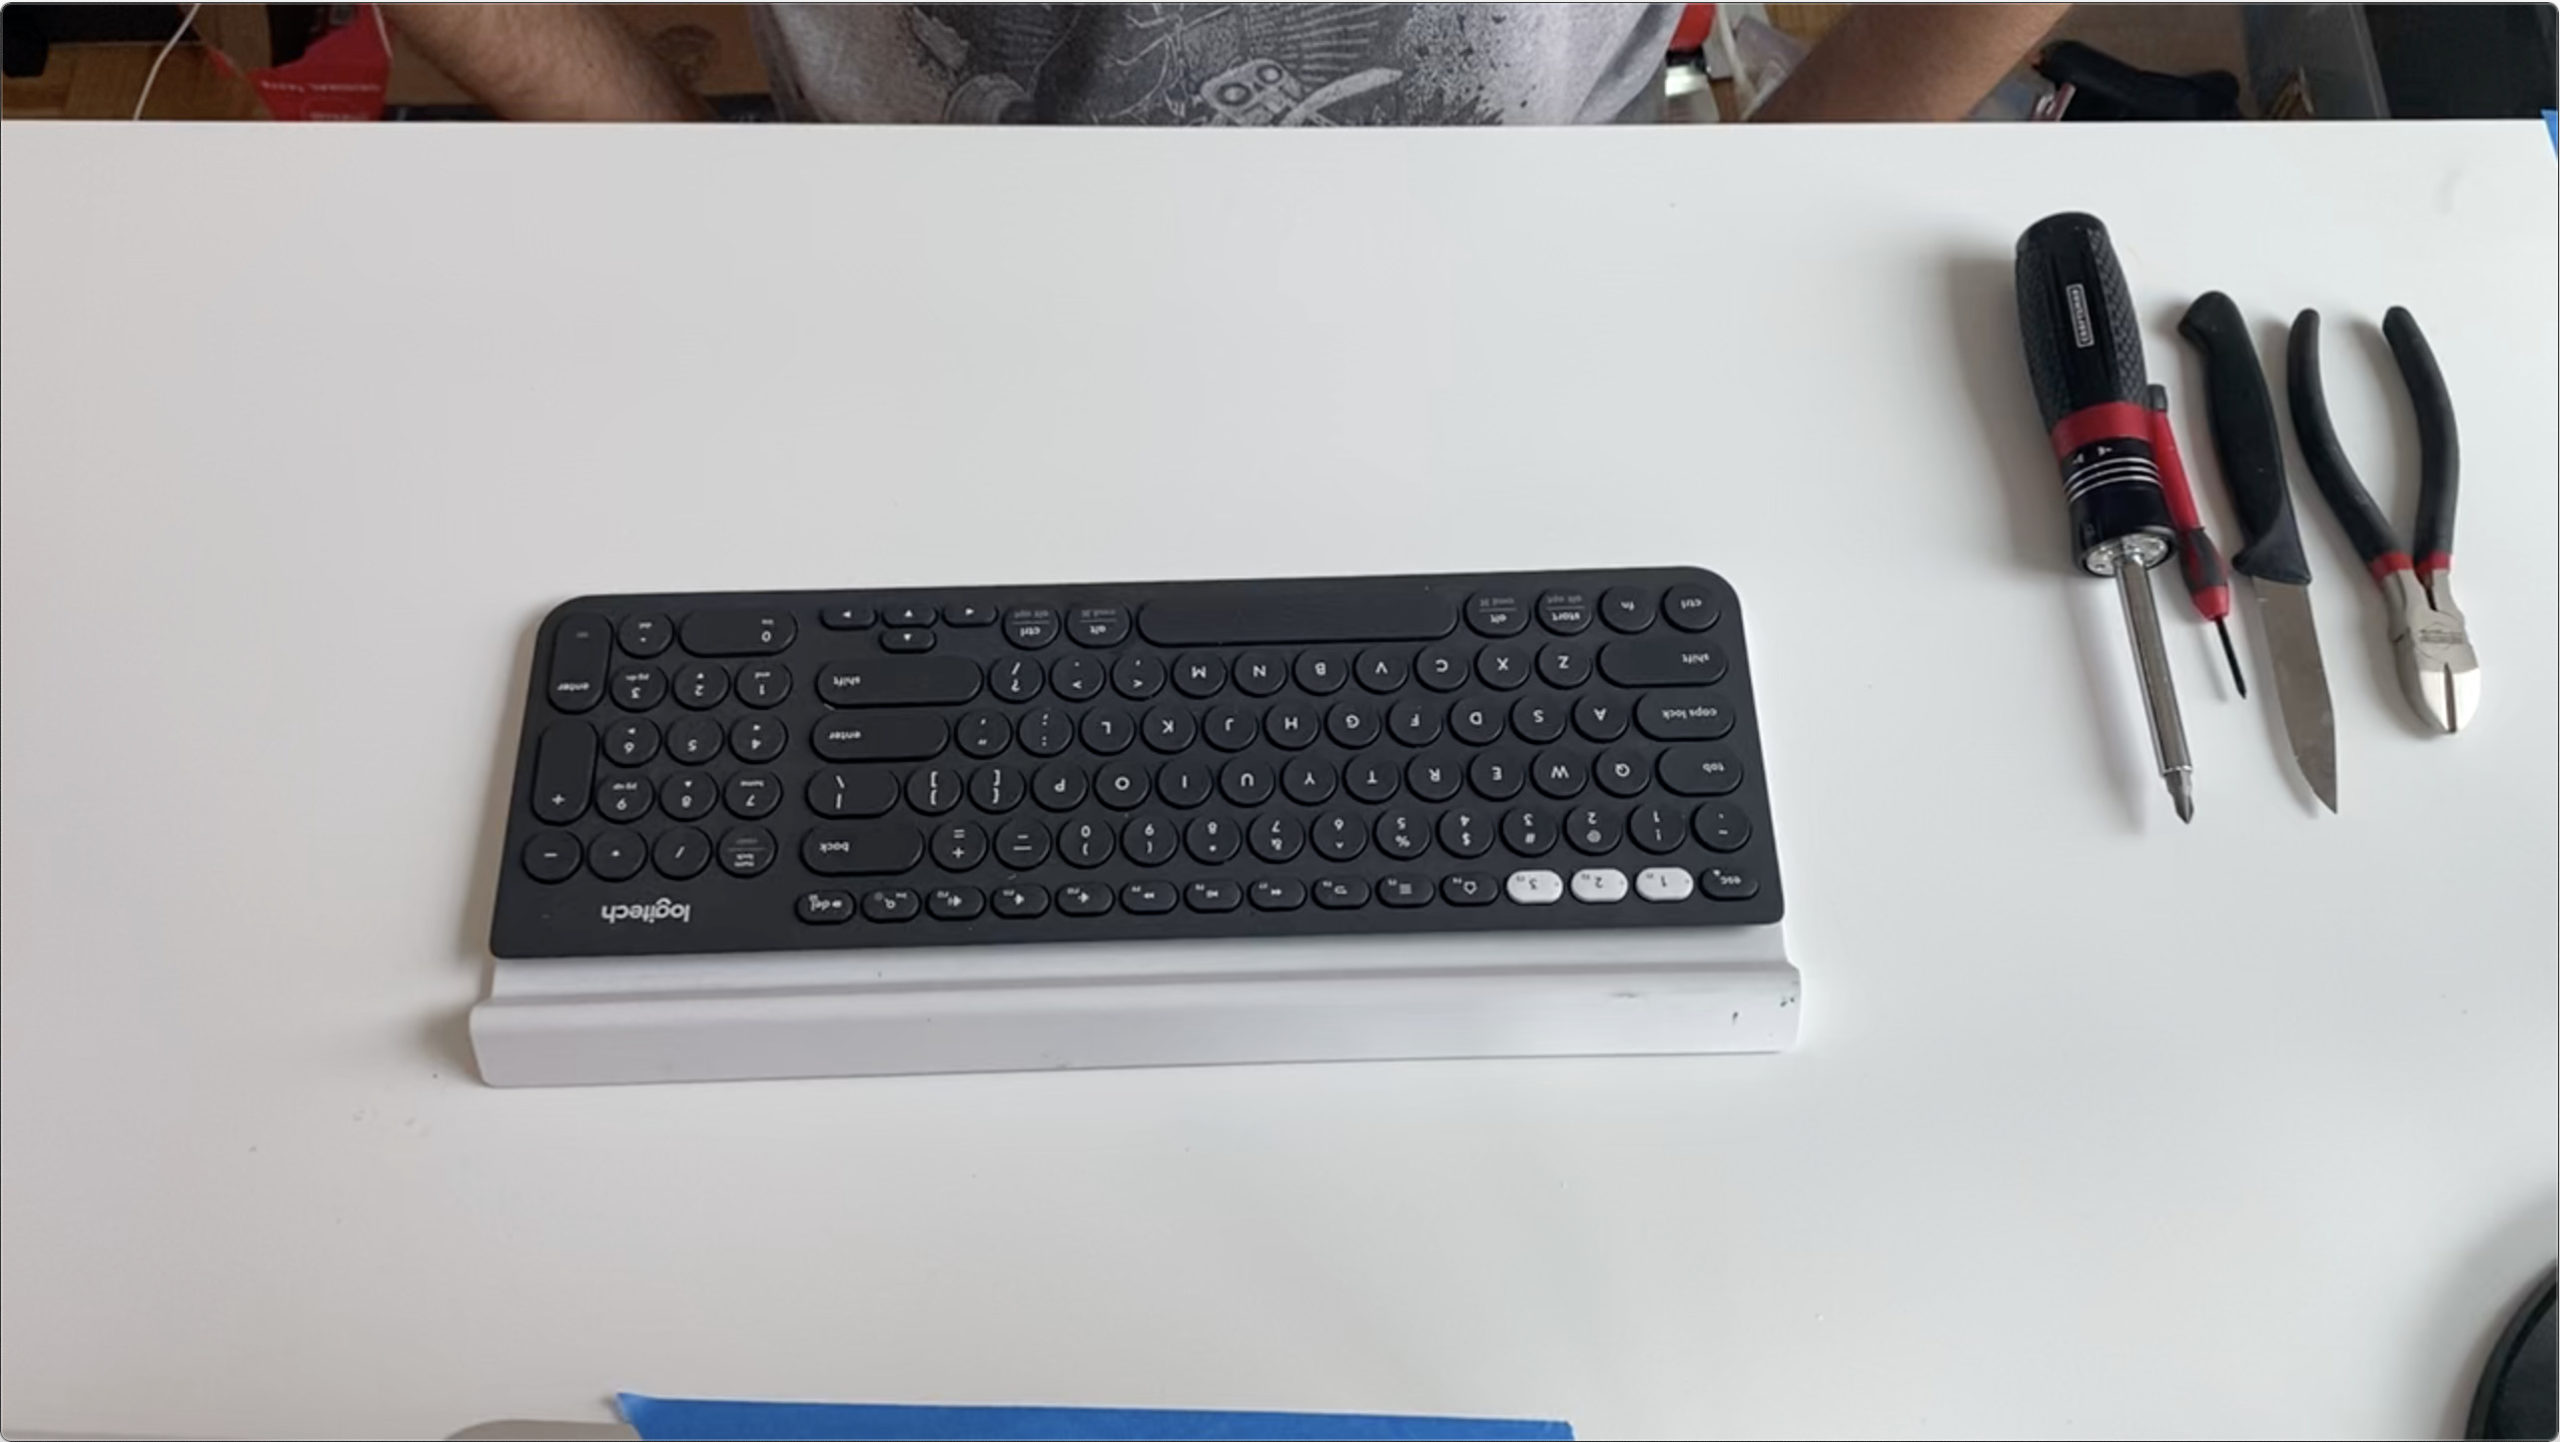 You are currently viewing Irreversible Disassembly – Logitech K780 Multi-Device Wireless Keyboard